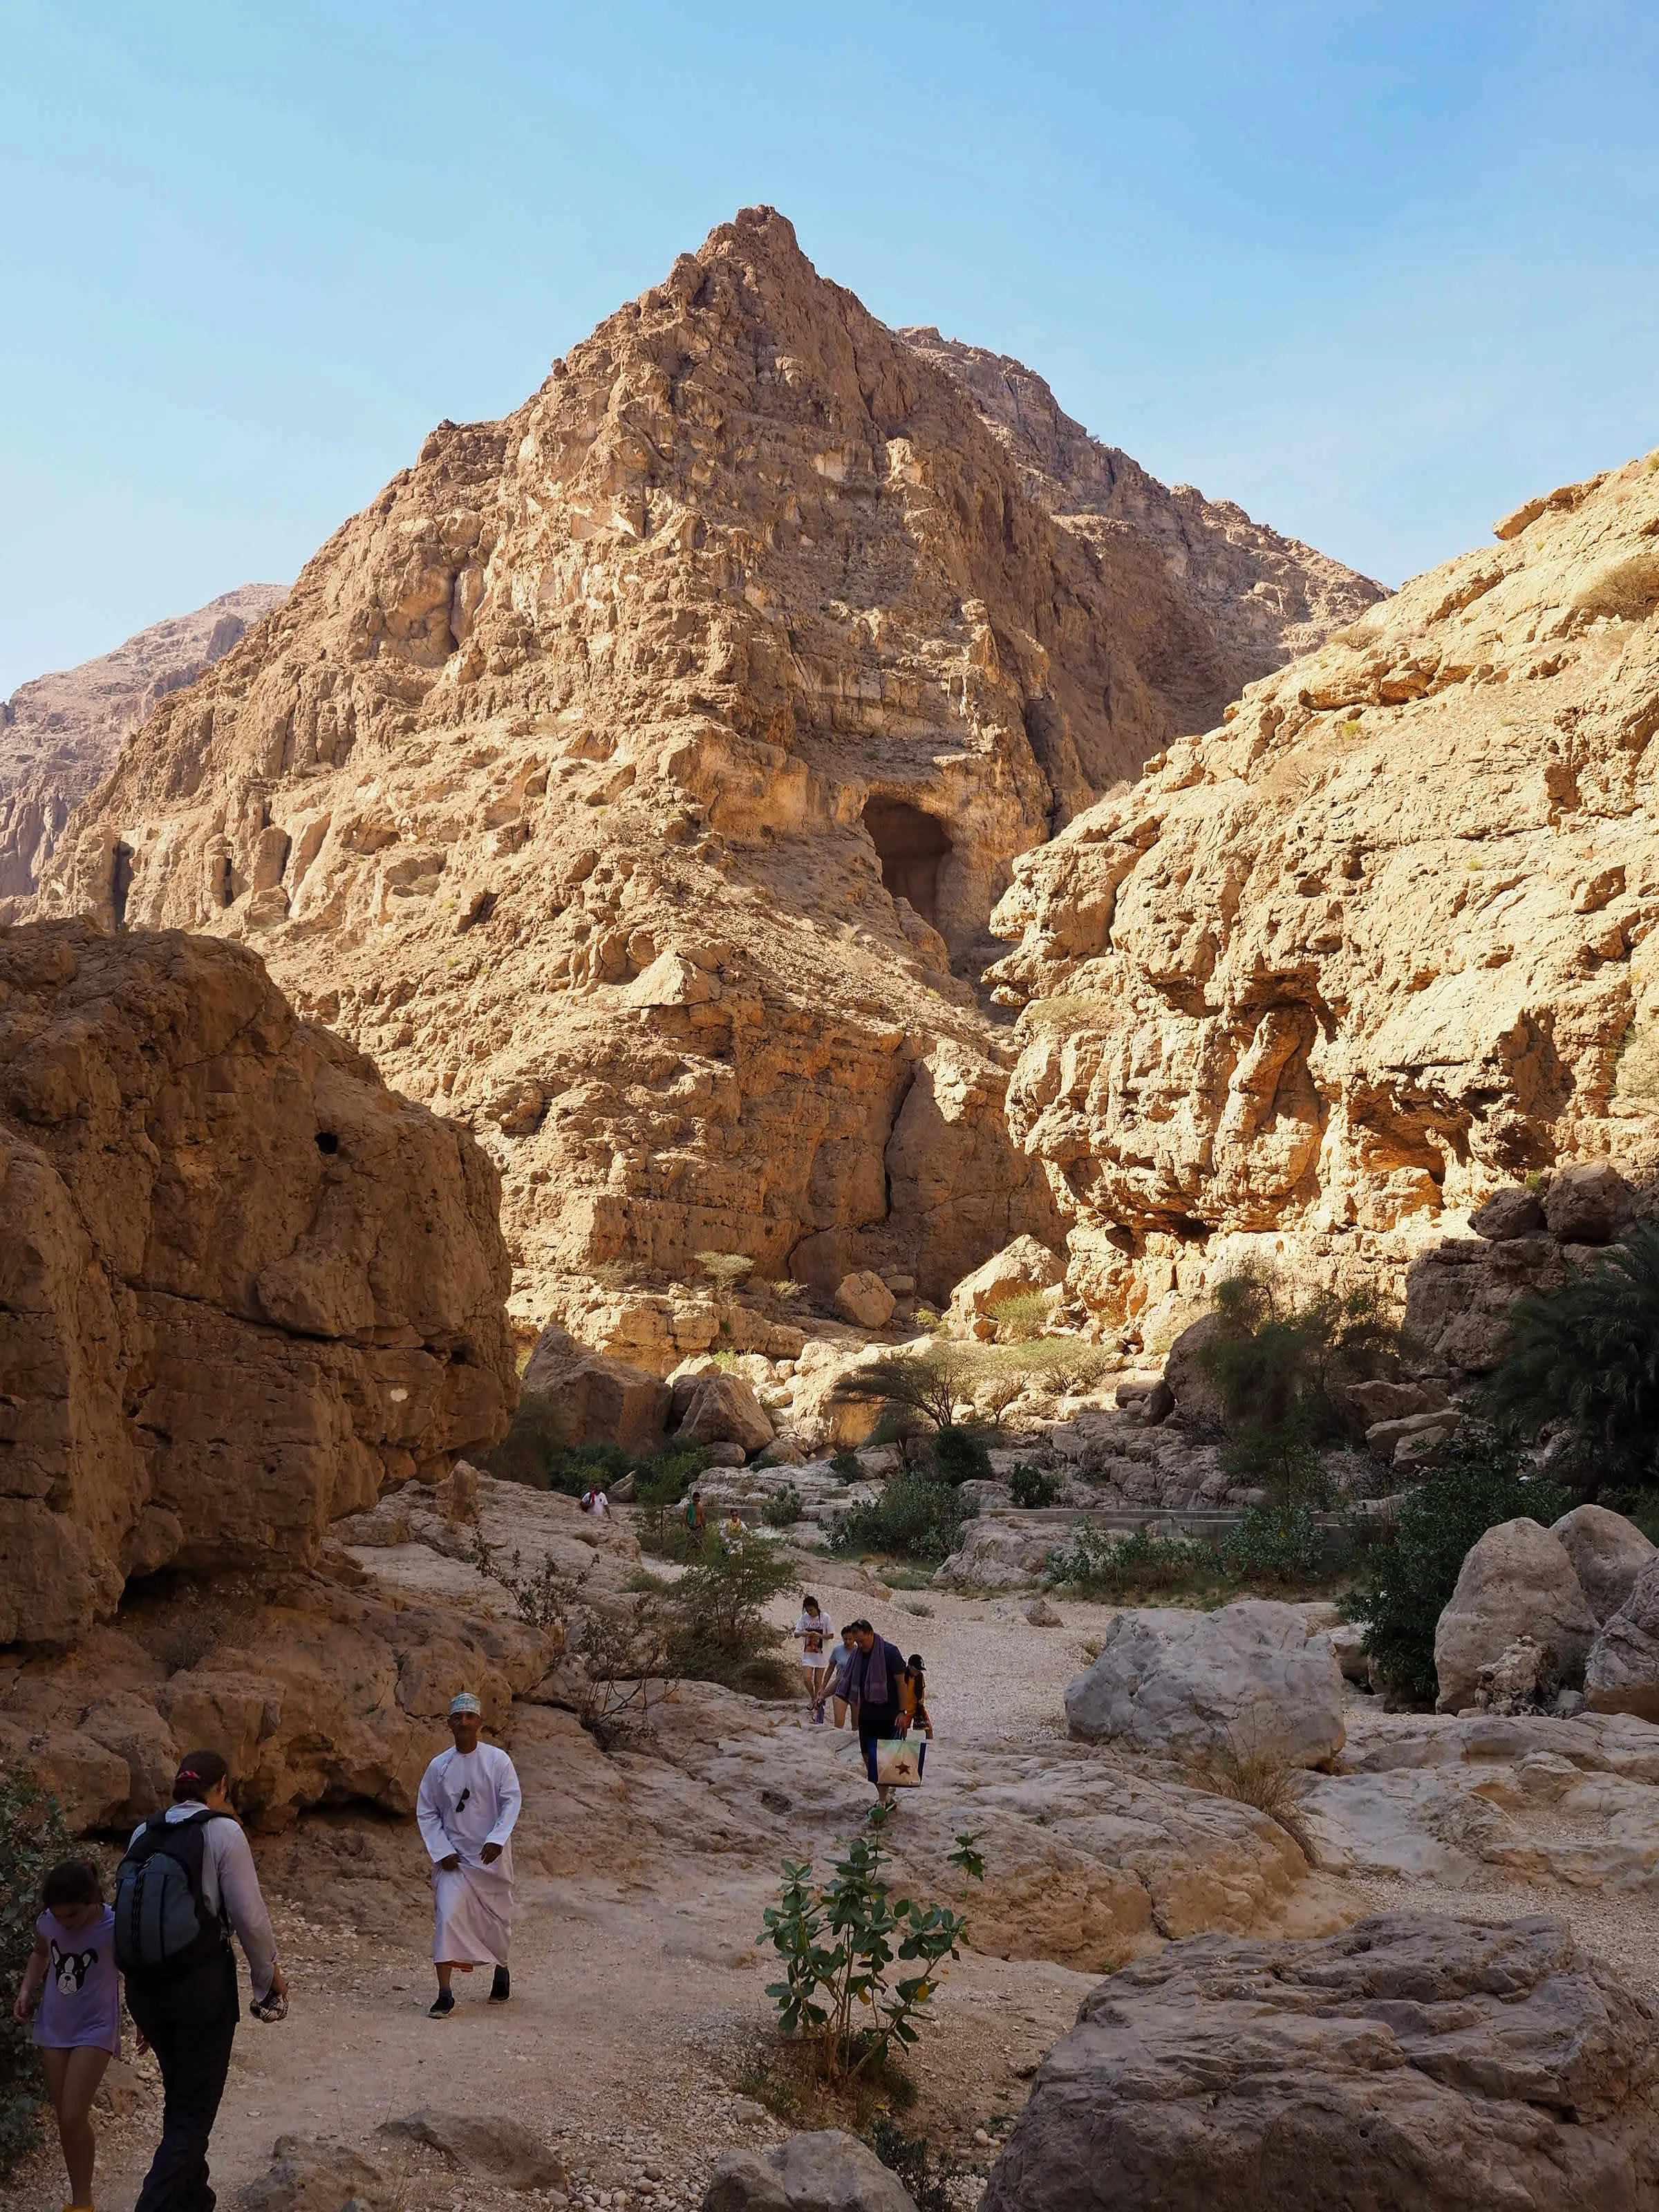 Wadi Shab was an easy hike along a gorgeous gorge.